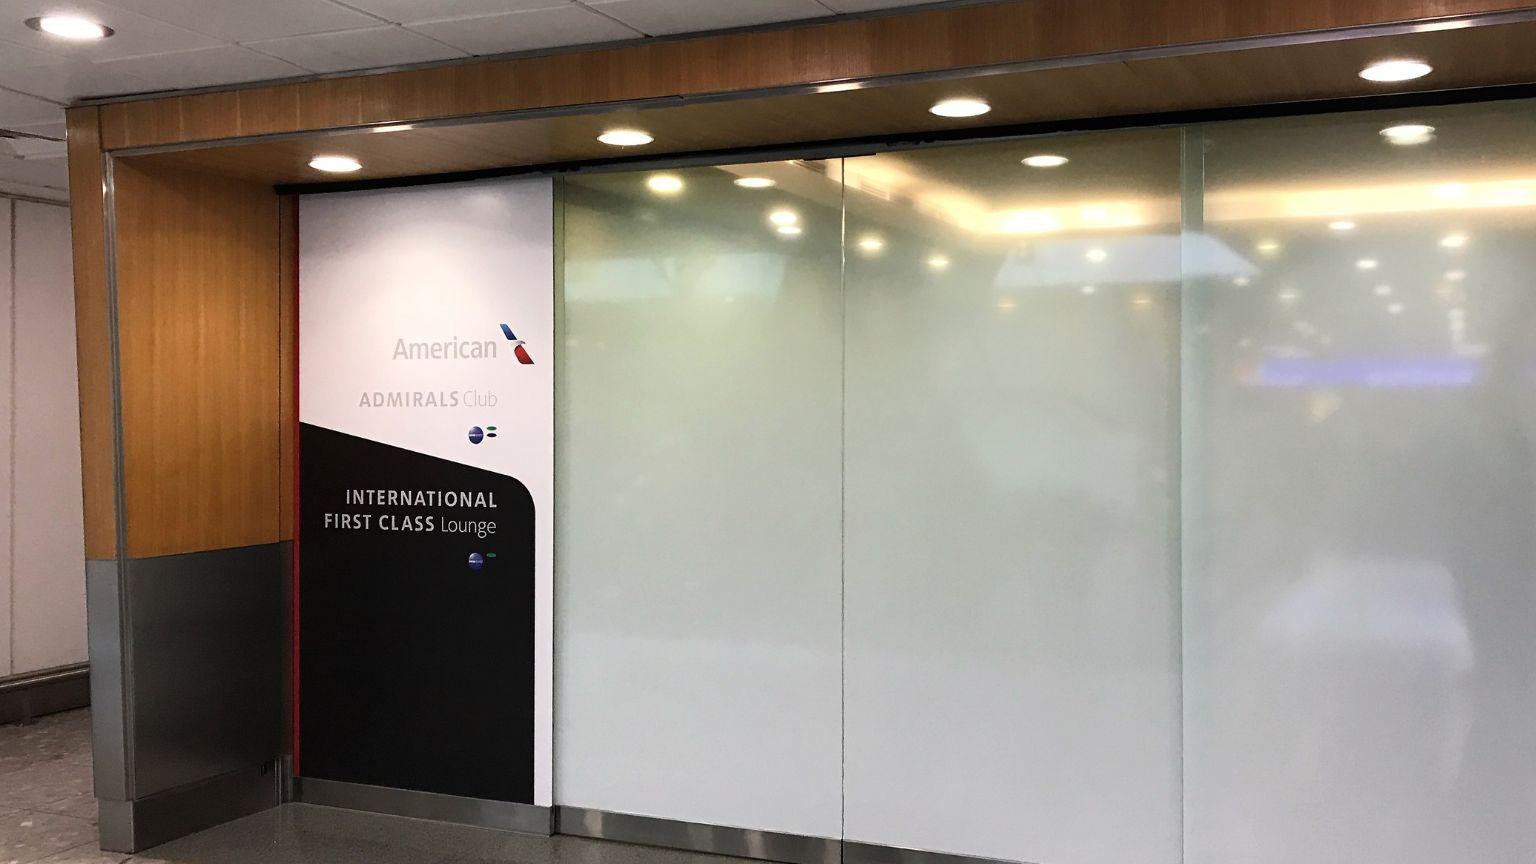 American Airlines Admirals Club Heathrow Lounge